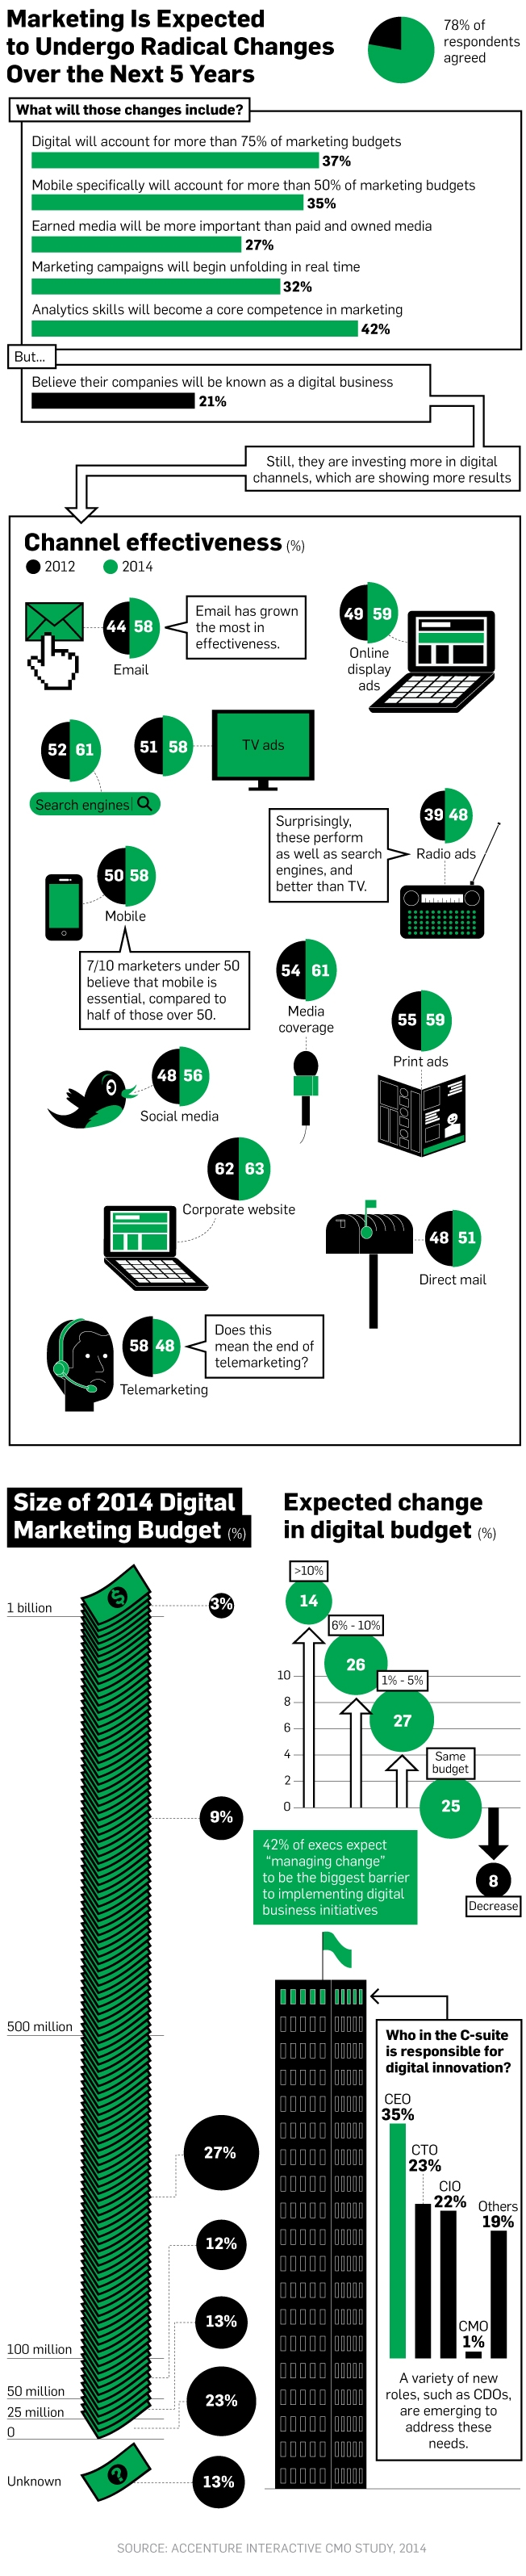 Marketing Expenditures In The Next 5 Years [INFOGRAPHIC]